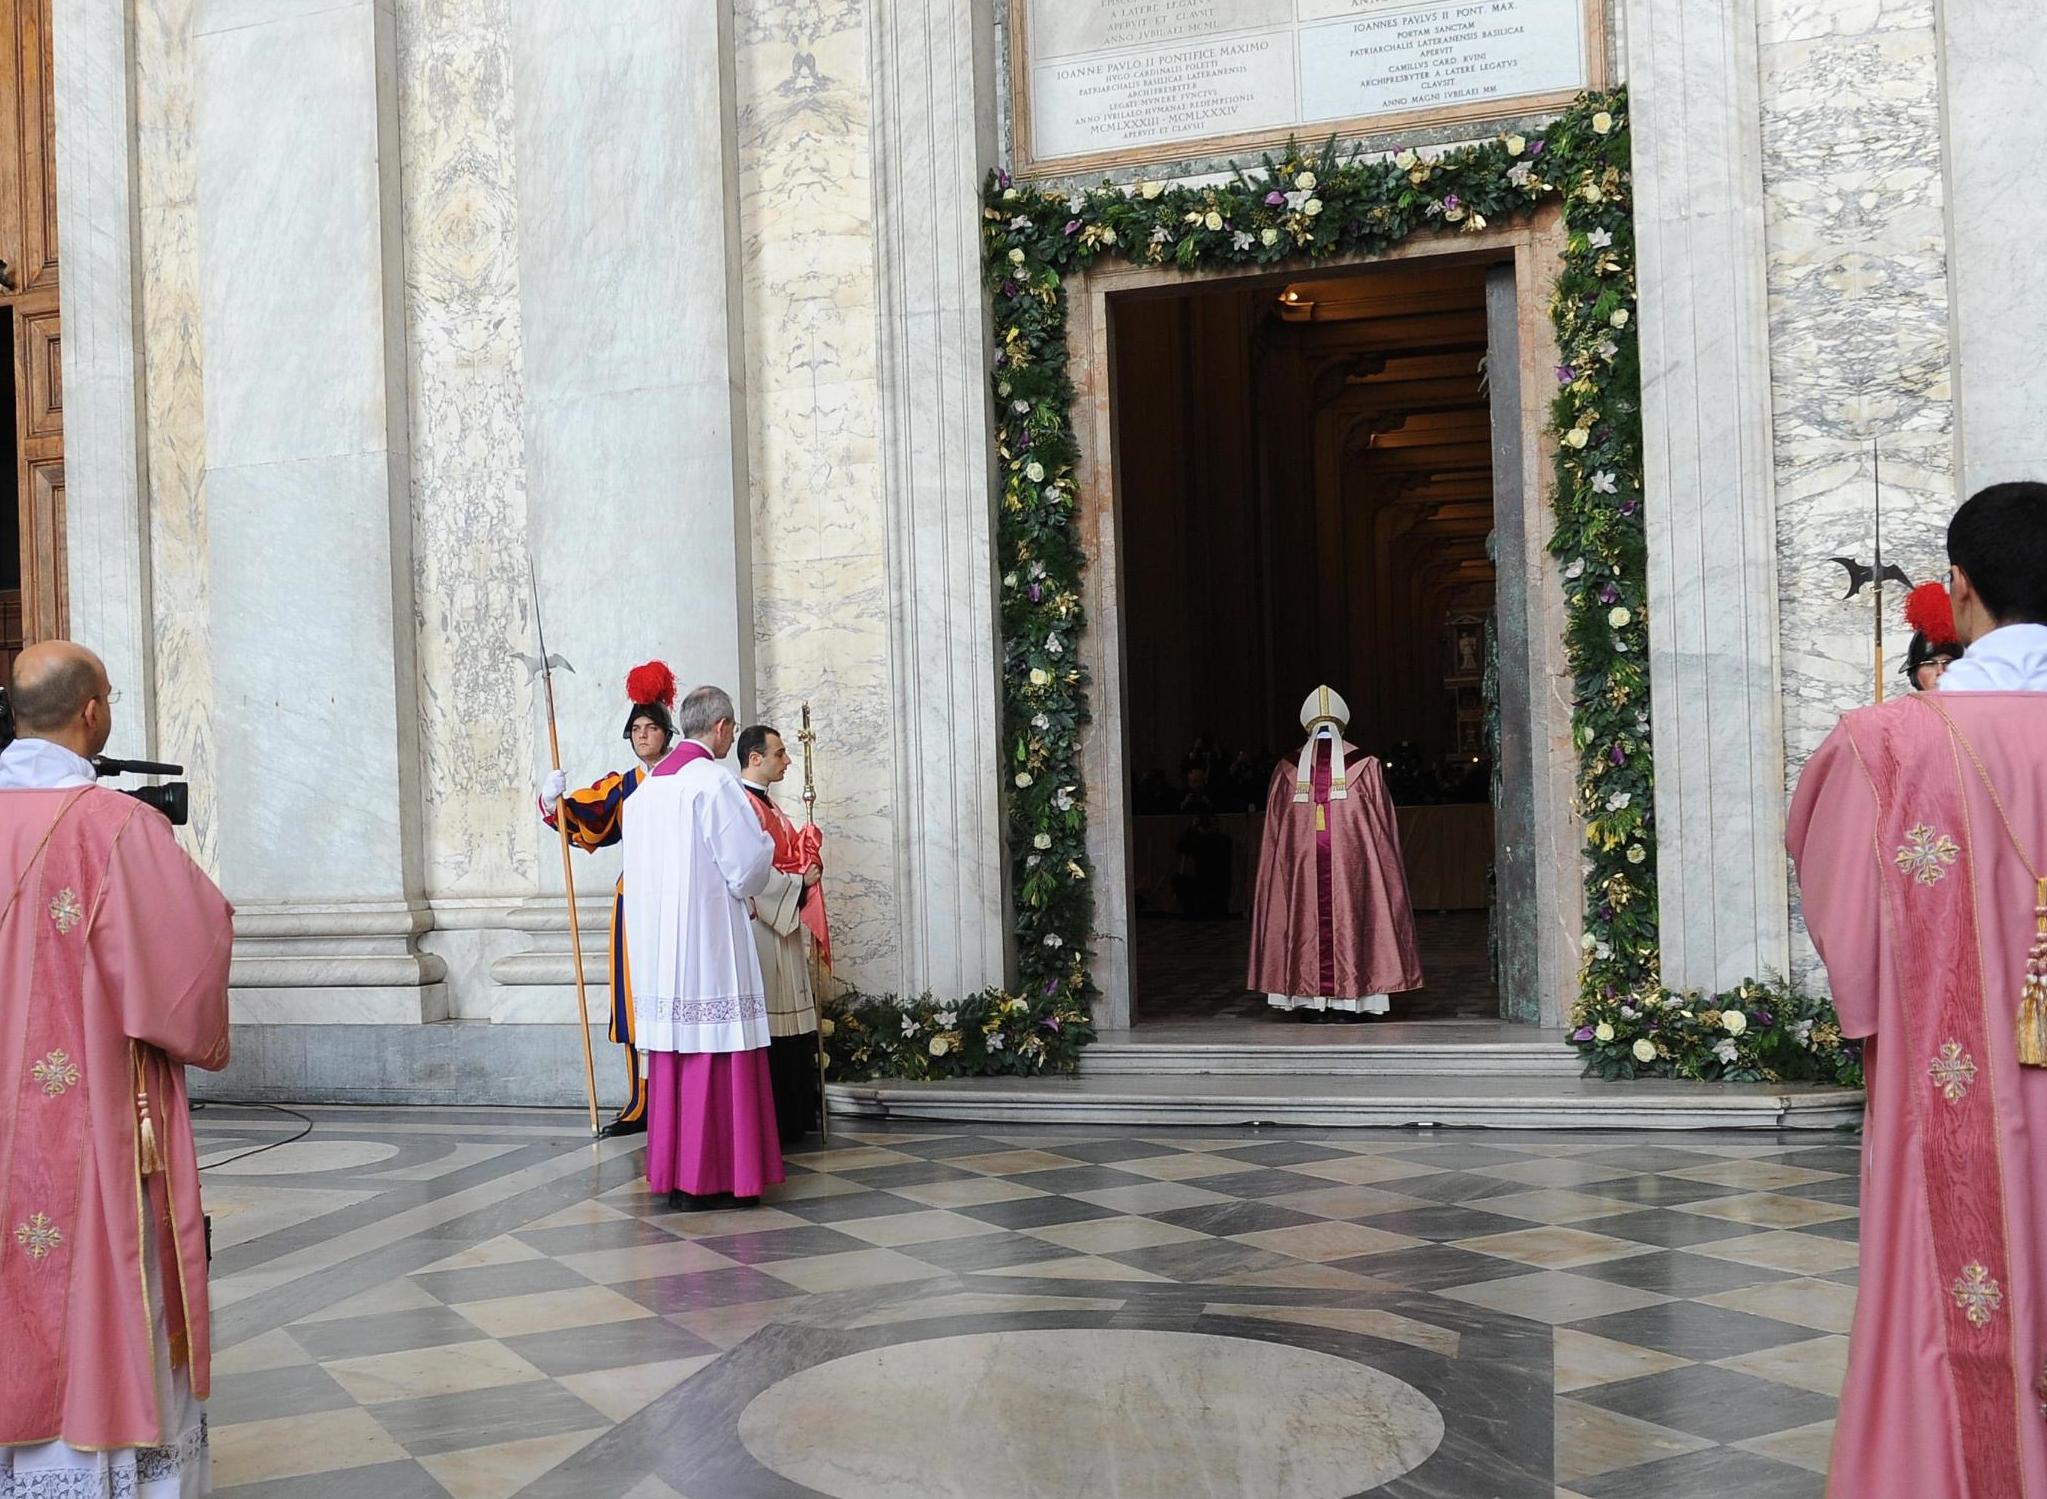 Pope Francis opens the Holy Door of St John Basilica